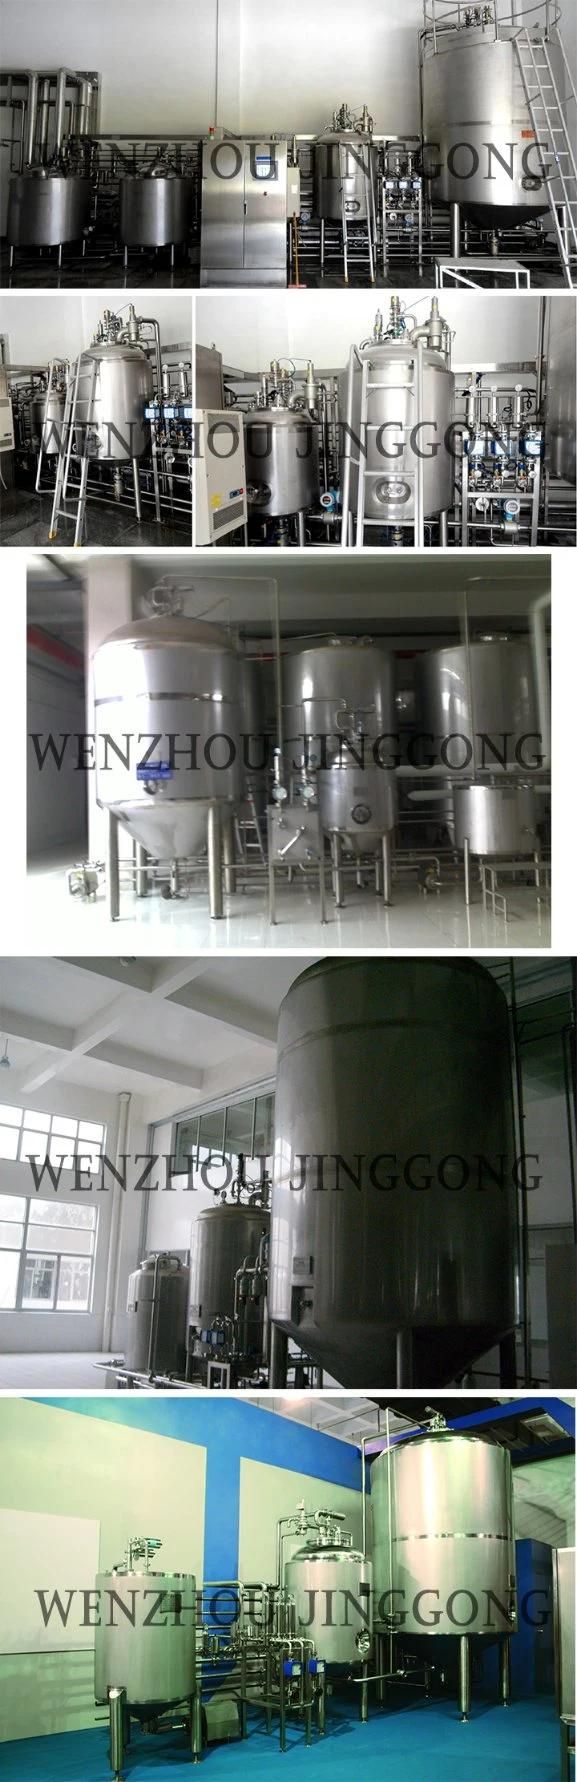 Yeast Propagation Tank Beer Brewing Brewery Equipment